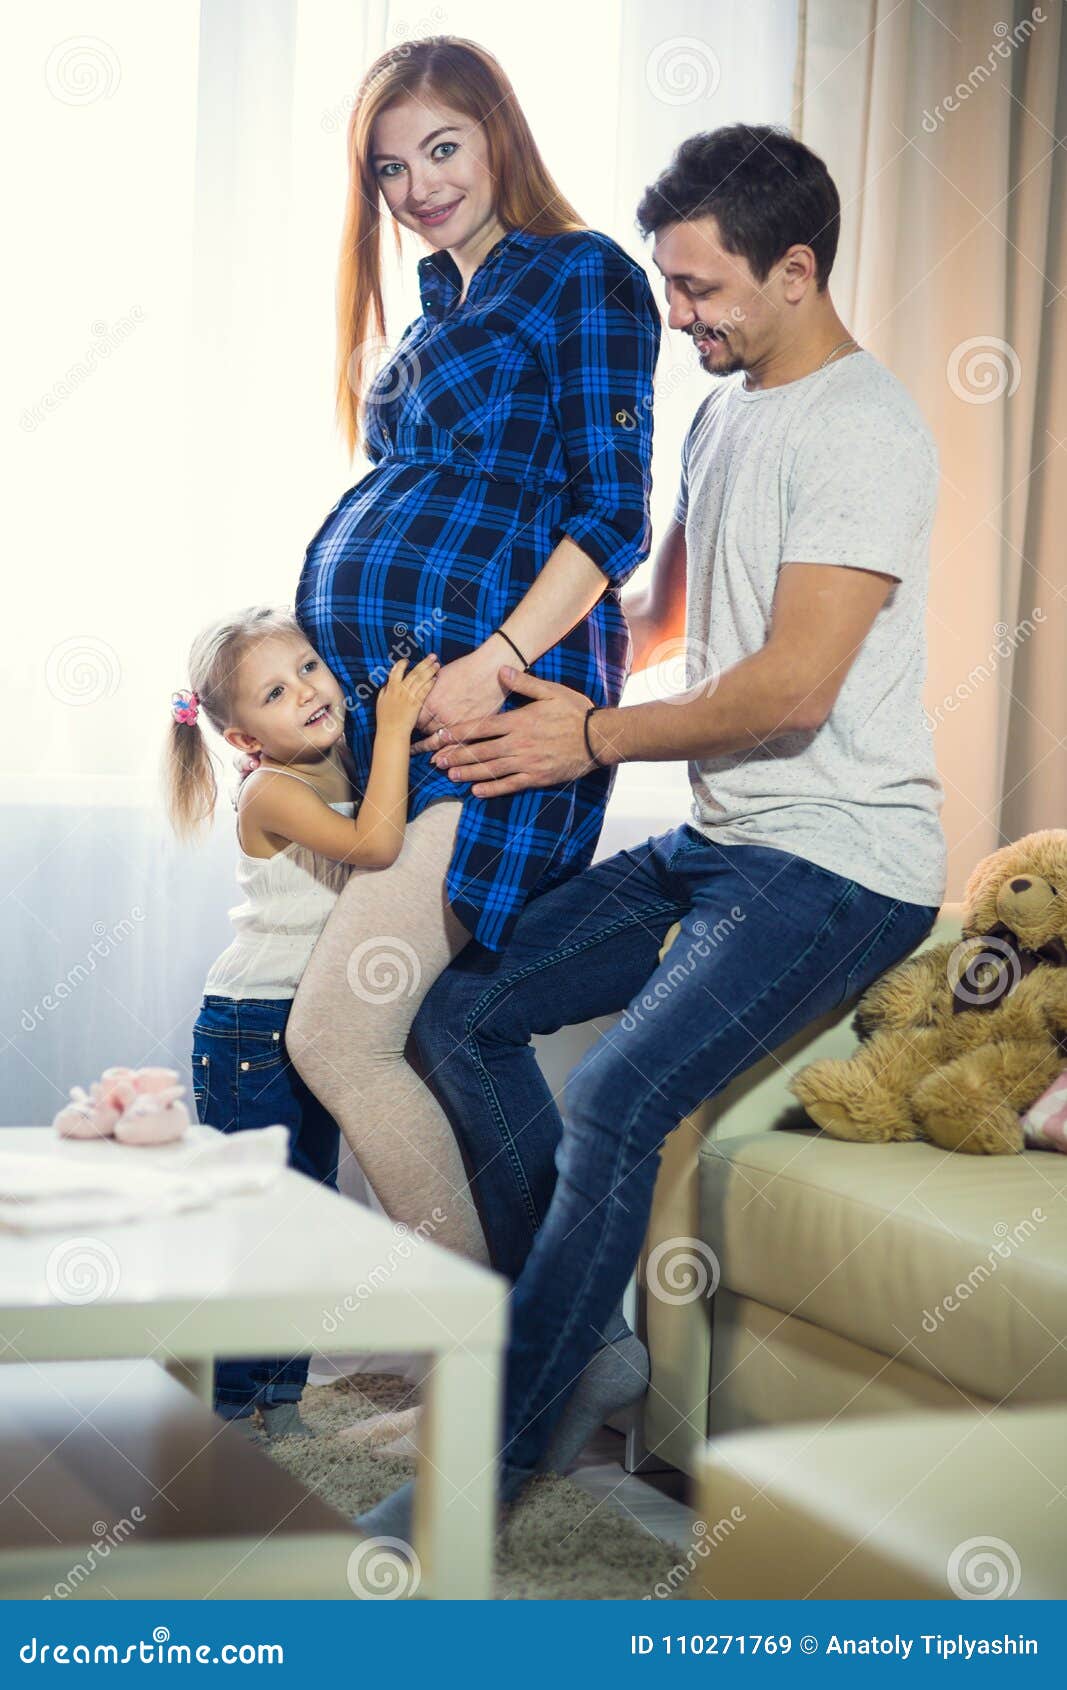 Daddy Daughter Pregnant